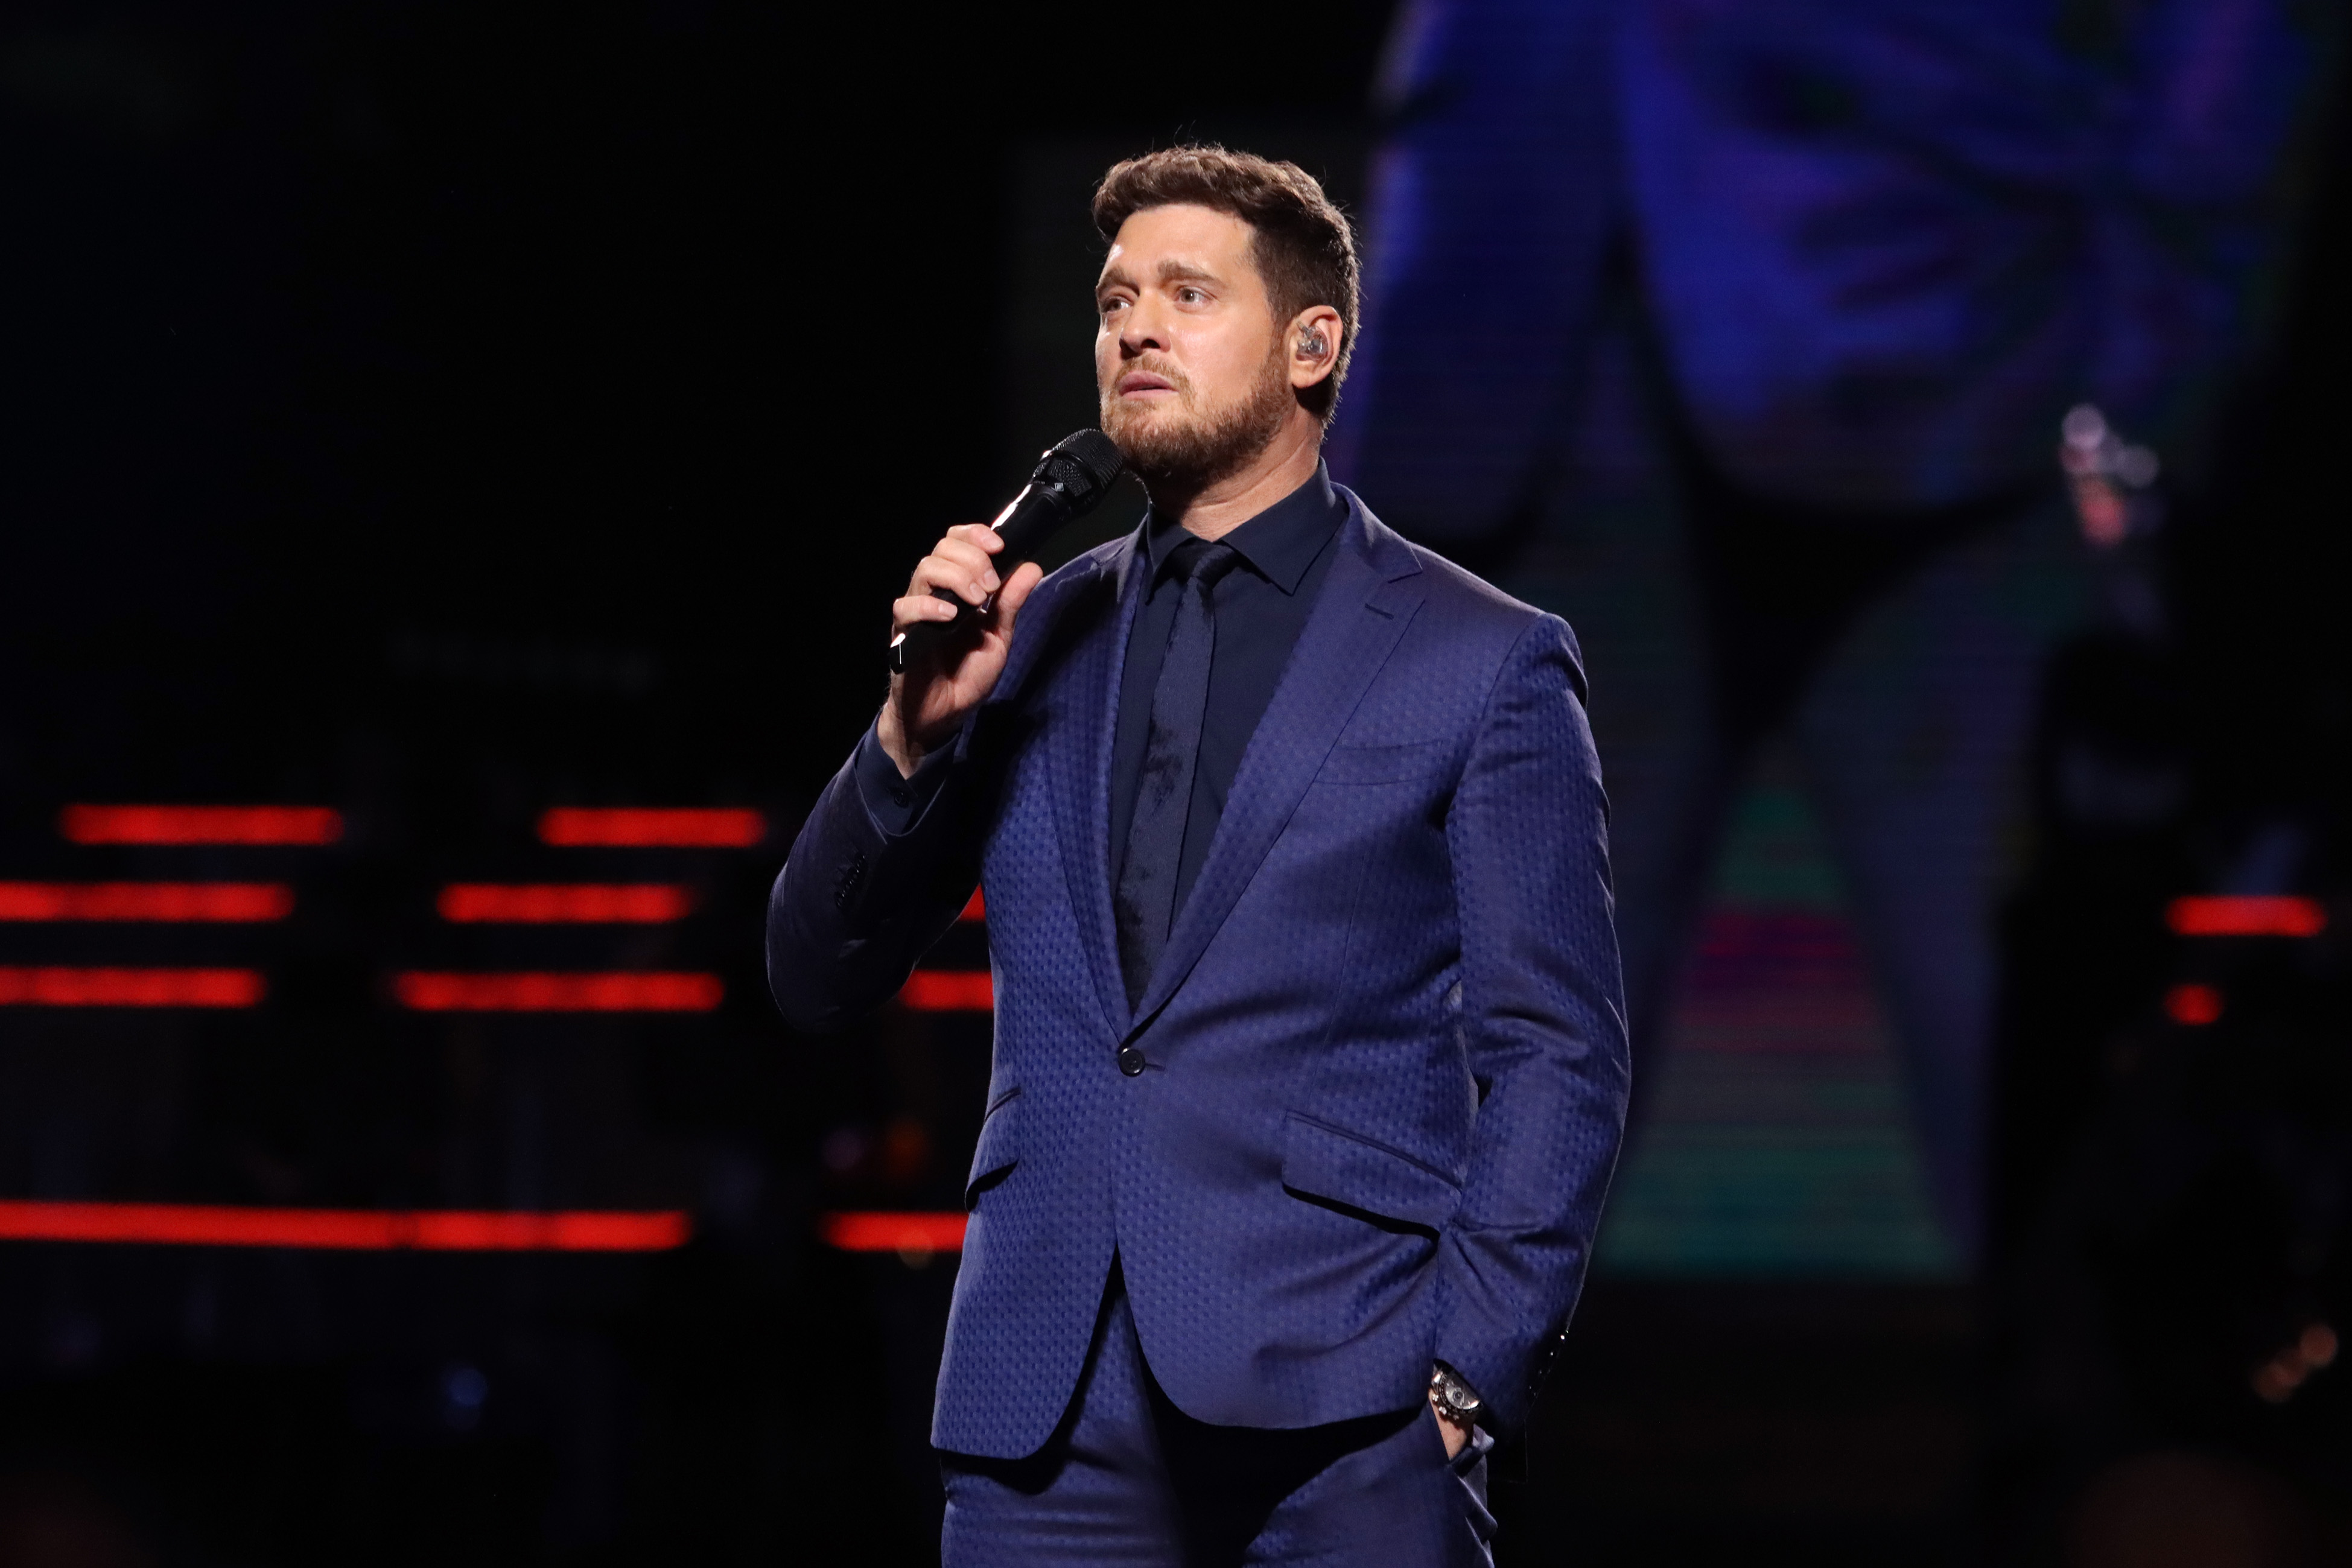 Michael Bublé performing at one of his concerts in Mexico City, Mexico on October 12, 2023 | Source: Getty Images